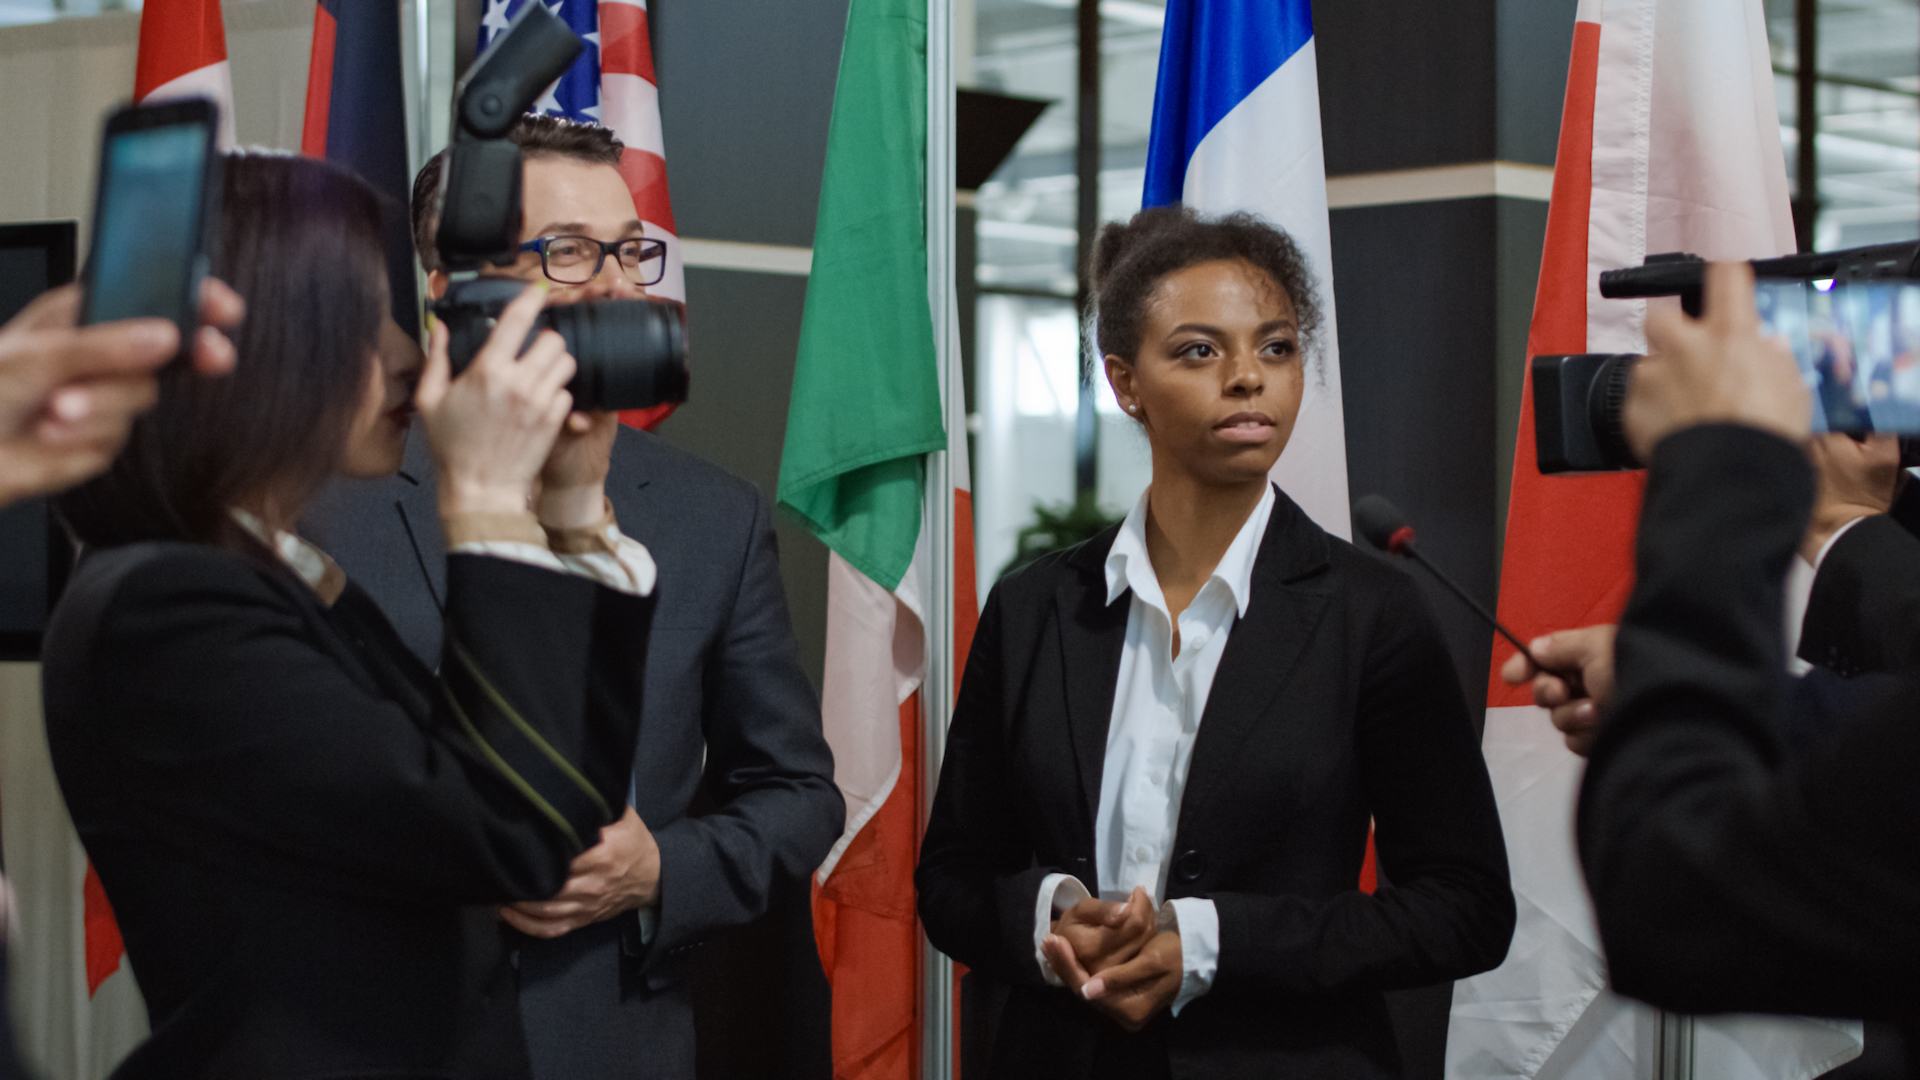 A woman in a suit talks to journalists in front of flags